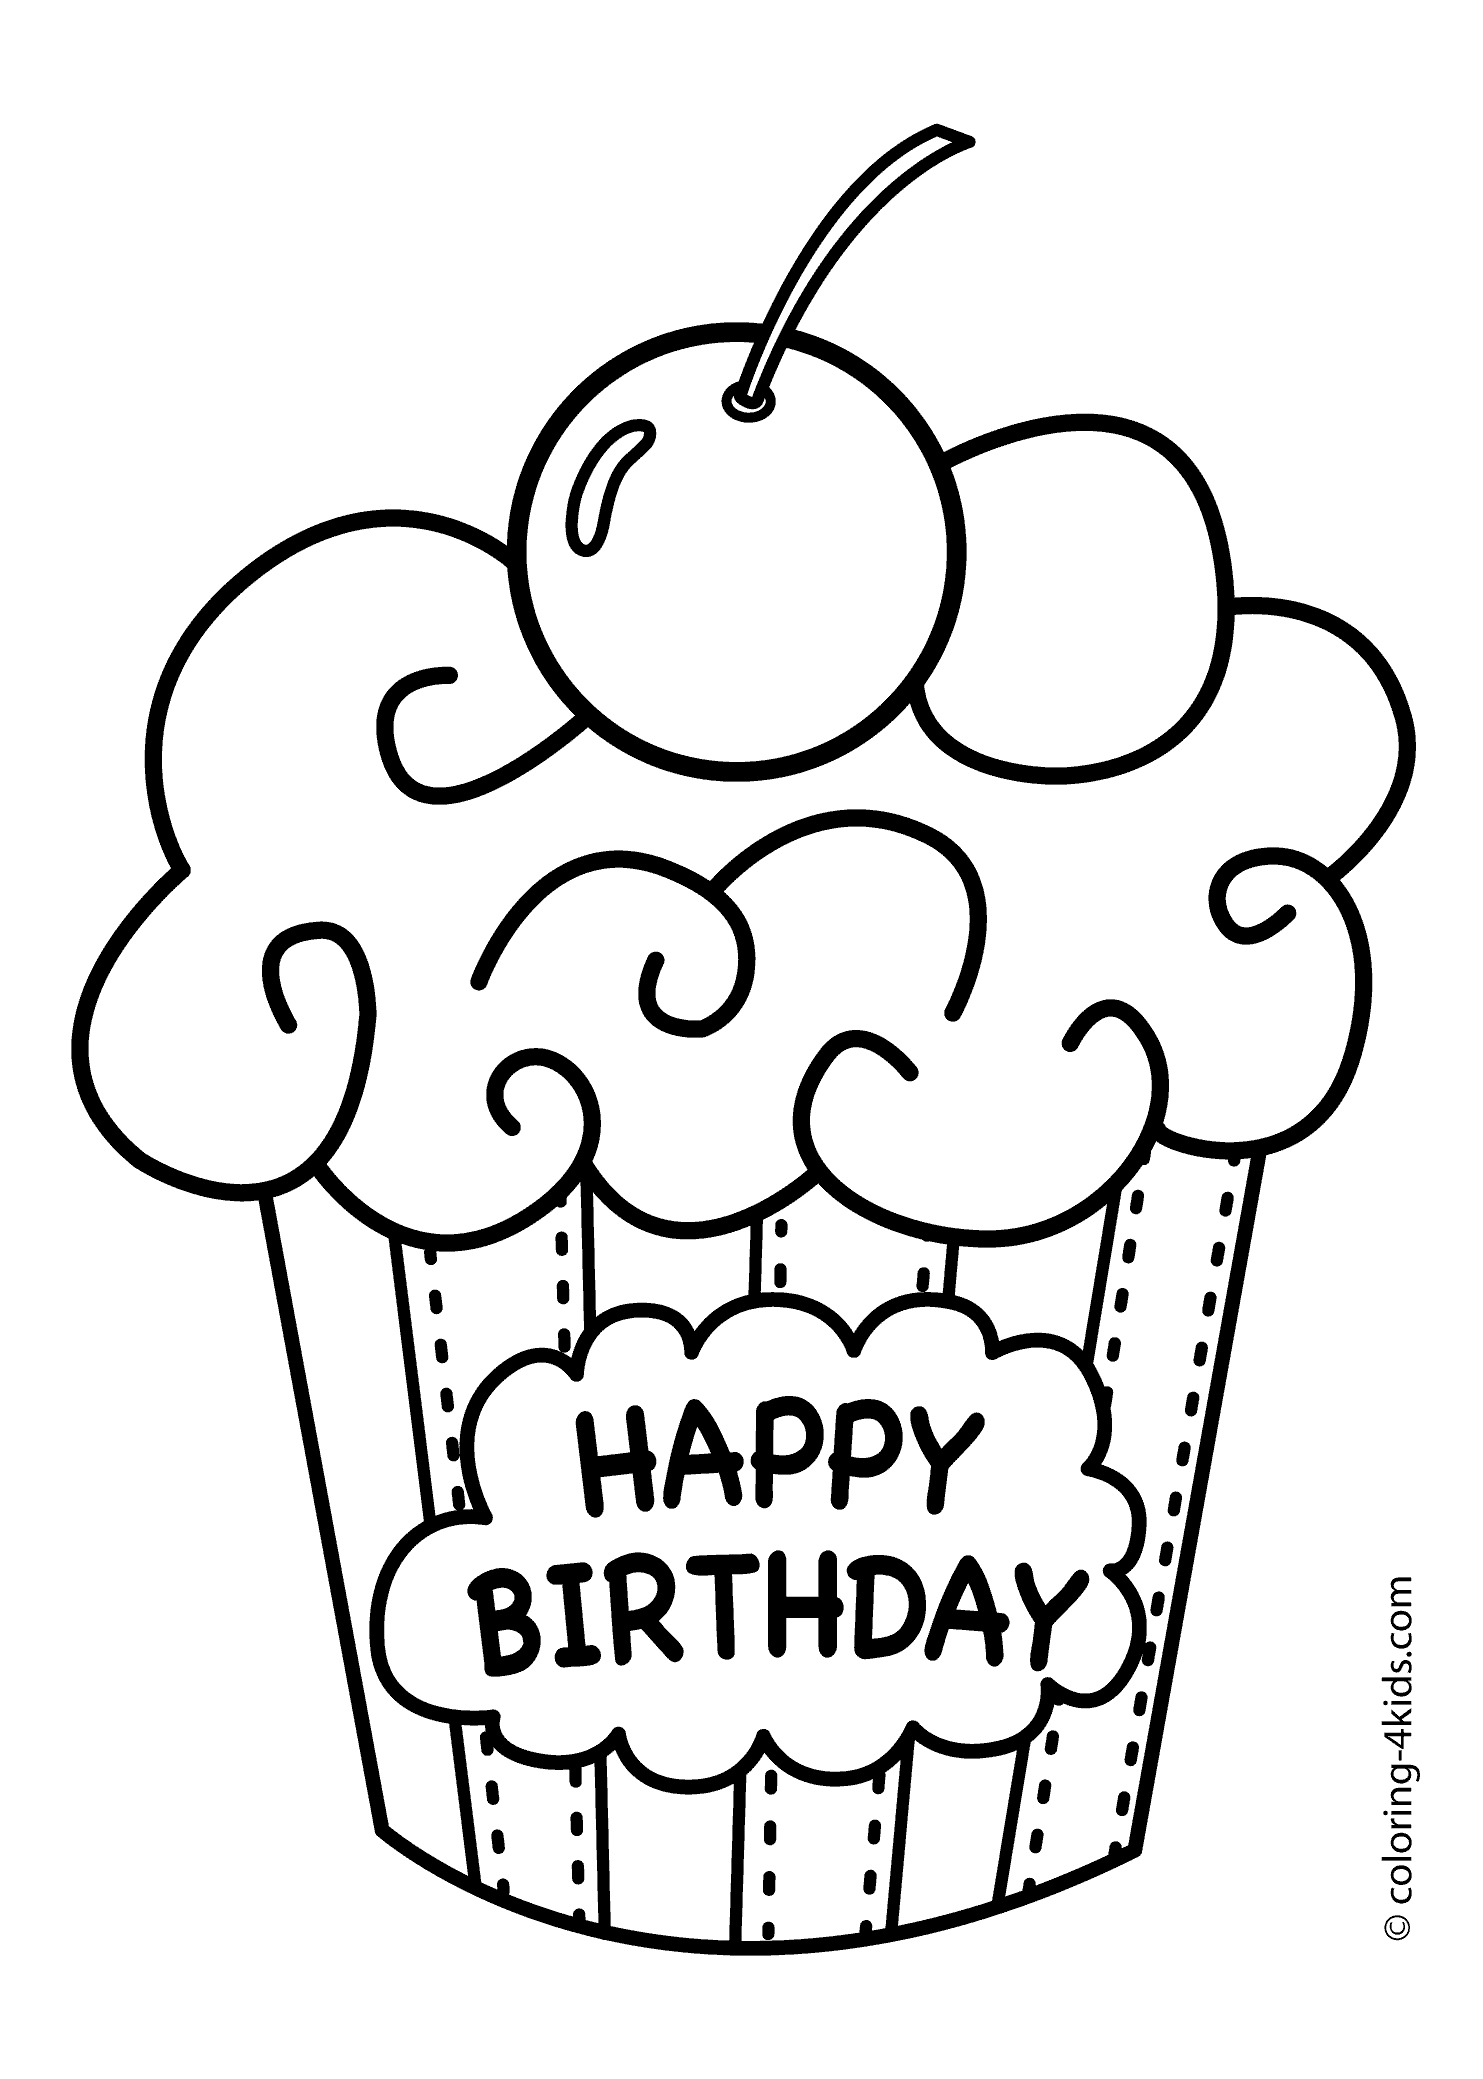 coloring page of a birthday cake birthday cake coloring pages to download and print for free of coloring a birthday cake page 